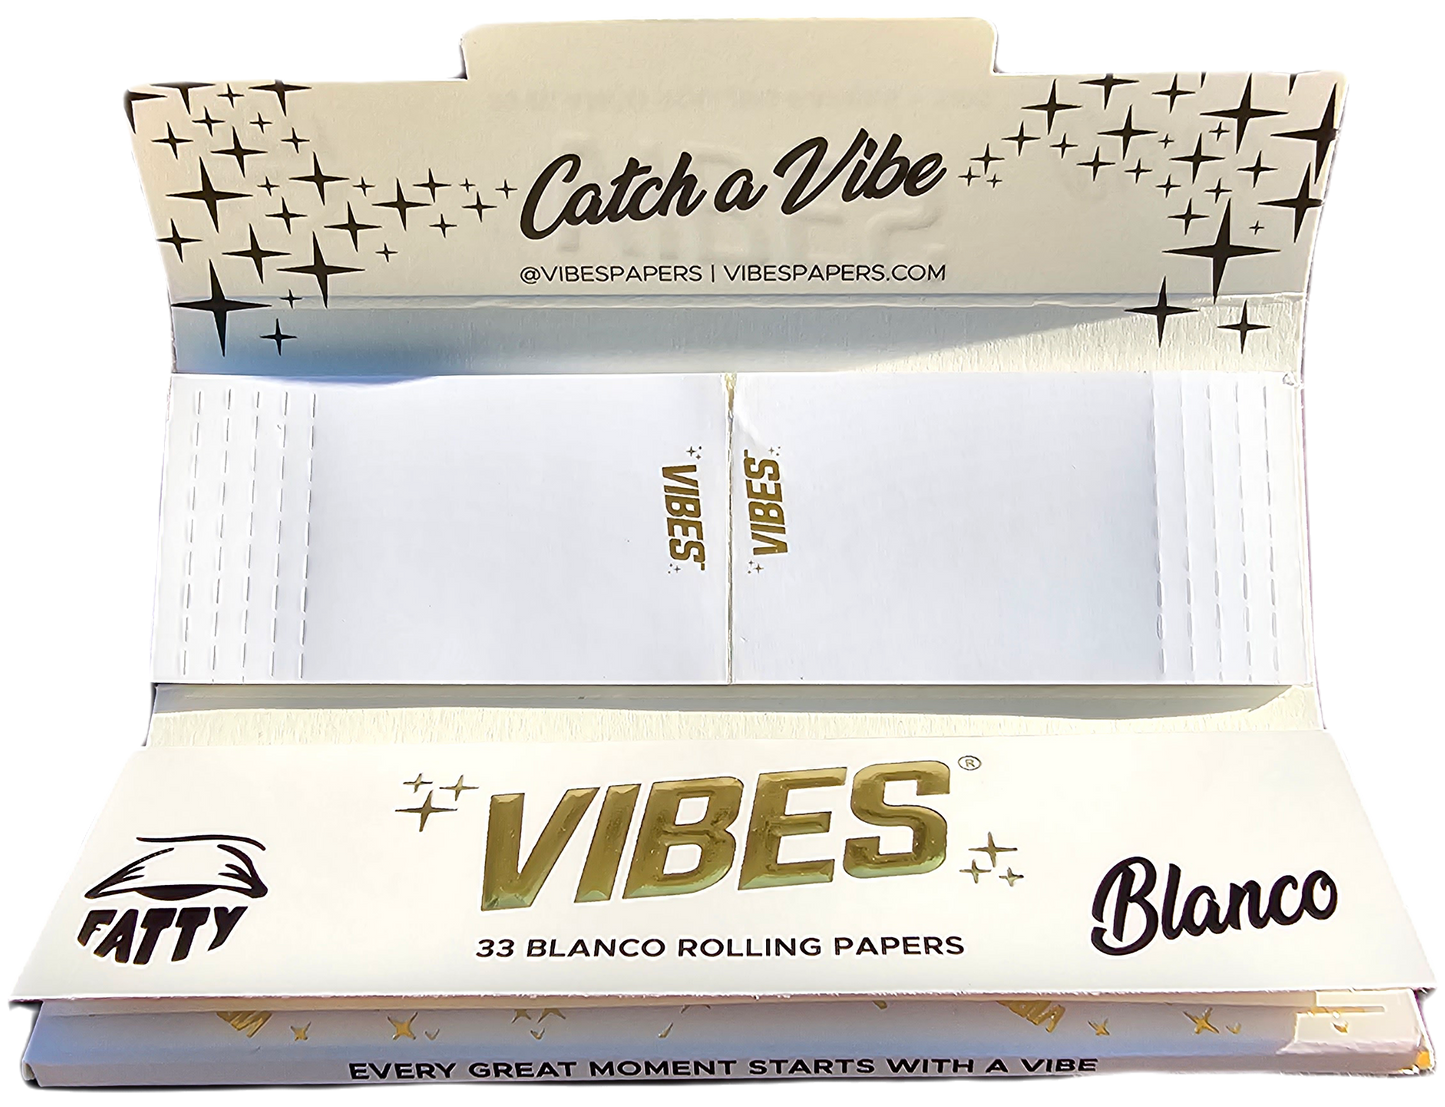 Vibes Blanco Fatty Papers + tips (compatible with Sidetwist XL Roller)